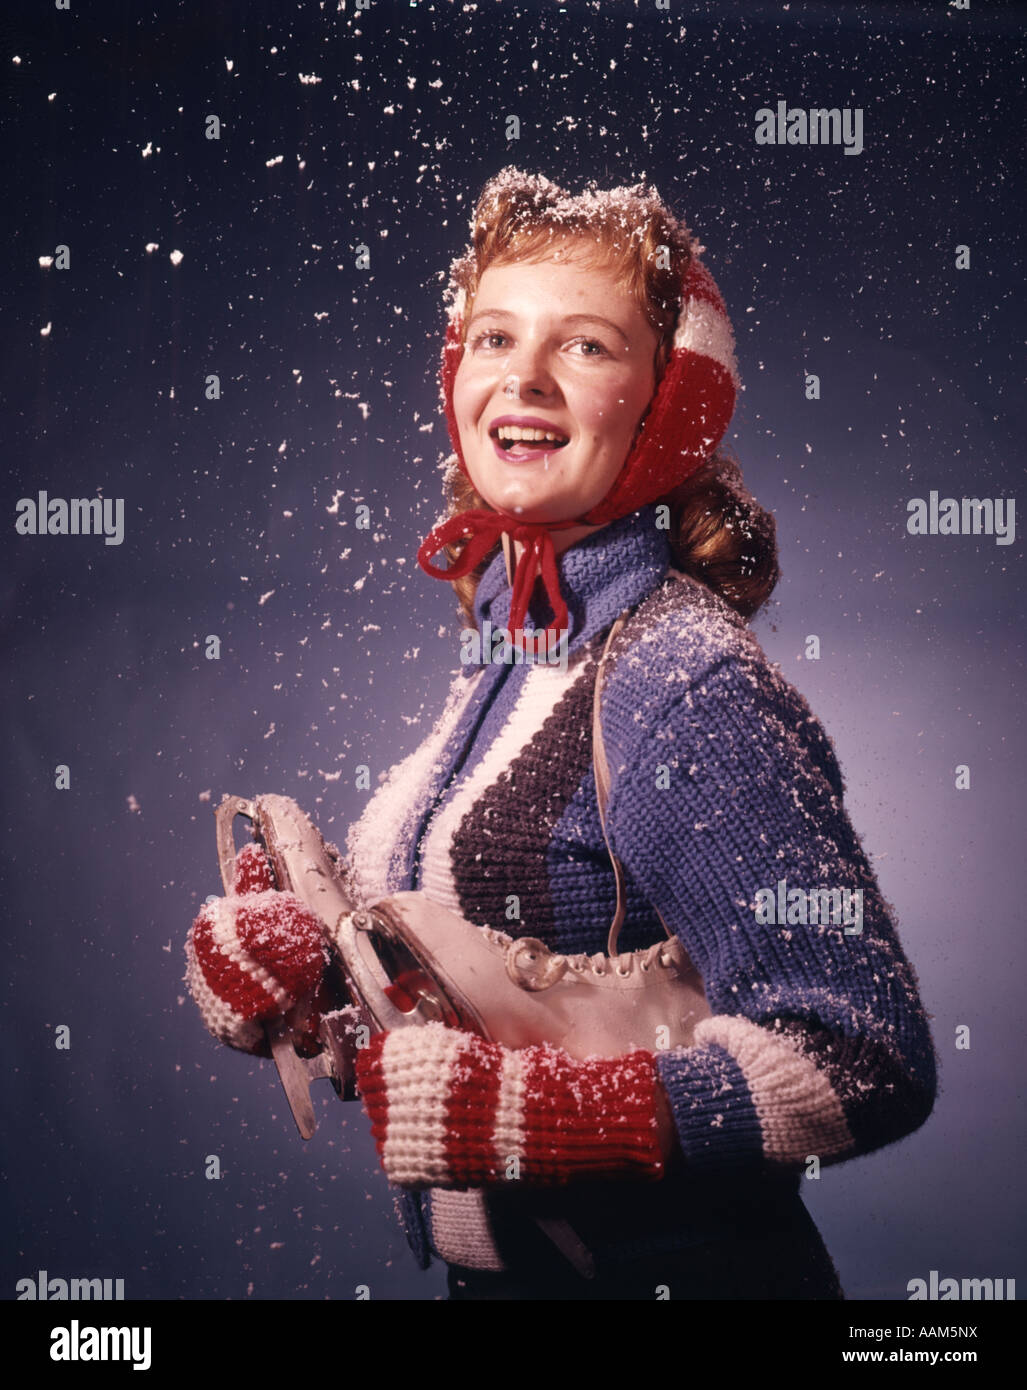 1960s SMILING YOUNG WOMAN WEARING RED MITTENS EAR MUFFS BLUE SWEATER HOLDING ICE SKATES IN FALLING SNOW Stock Photo